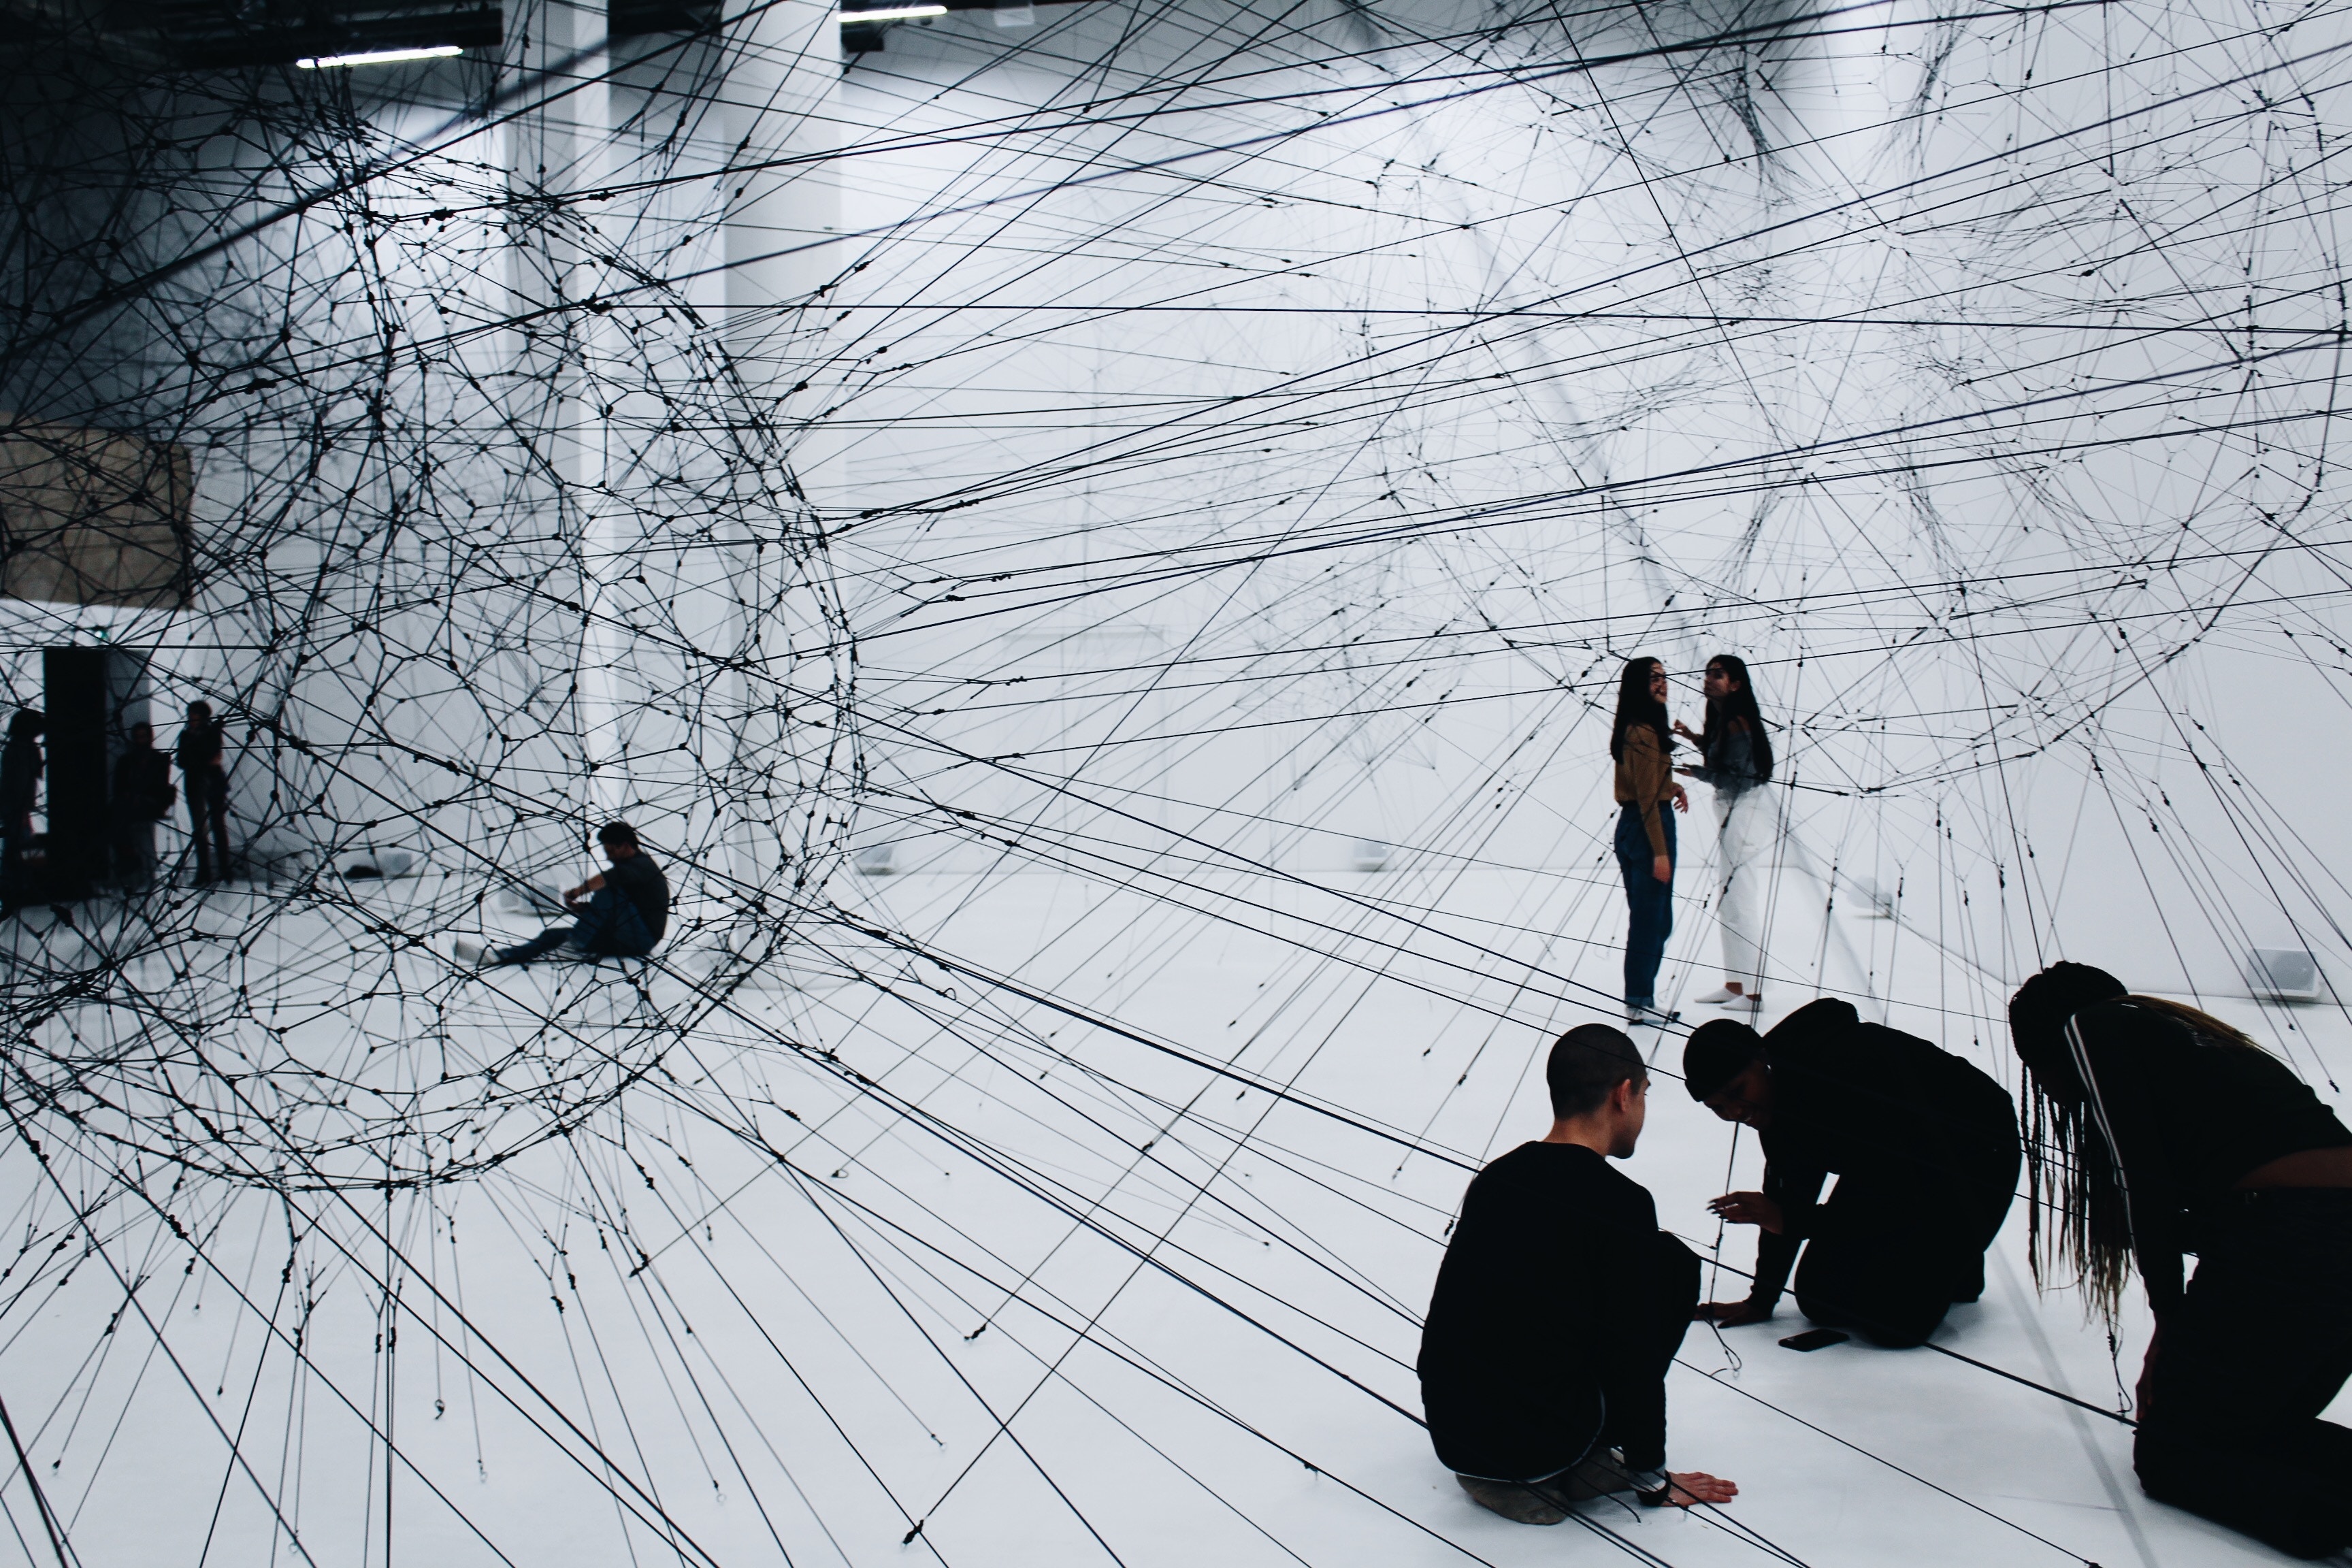 This is a photo of people dressed in all-black clothing in a white room or space. Black thin cords and cables are being connected in networks, and those are connected to two large orbs created by the webs of cords and cables. This photograph was taken by Alina Grubnyak.